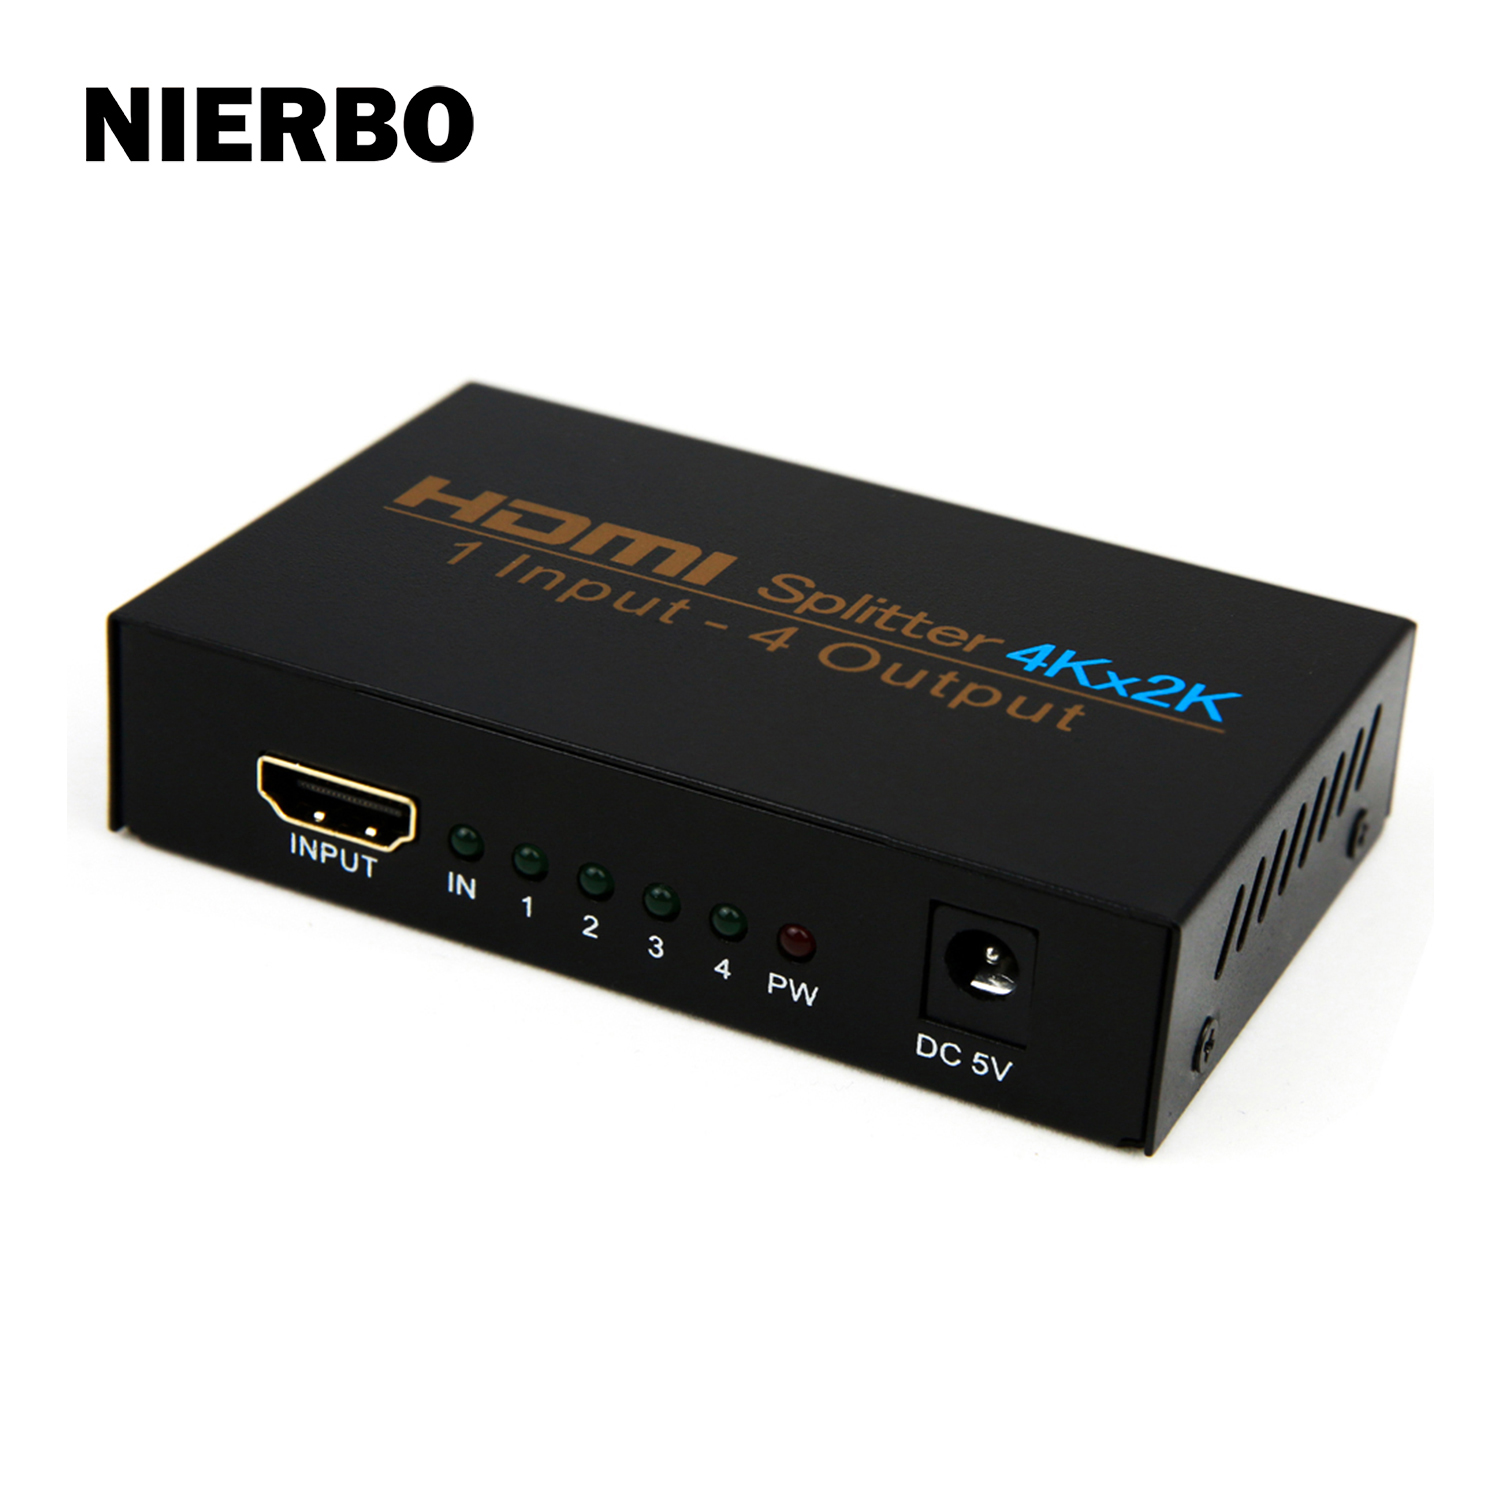 Full HD 1080p Goodlucking HDMI Splitter 5 Ports HDMI Switcher 5 Input 1 Output Supports 4K@30Hz 3D with IR Remote Control